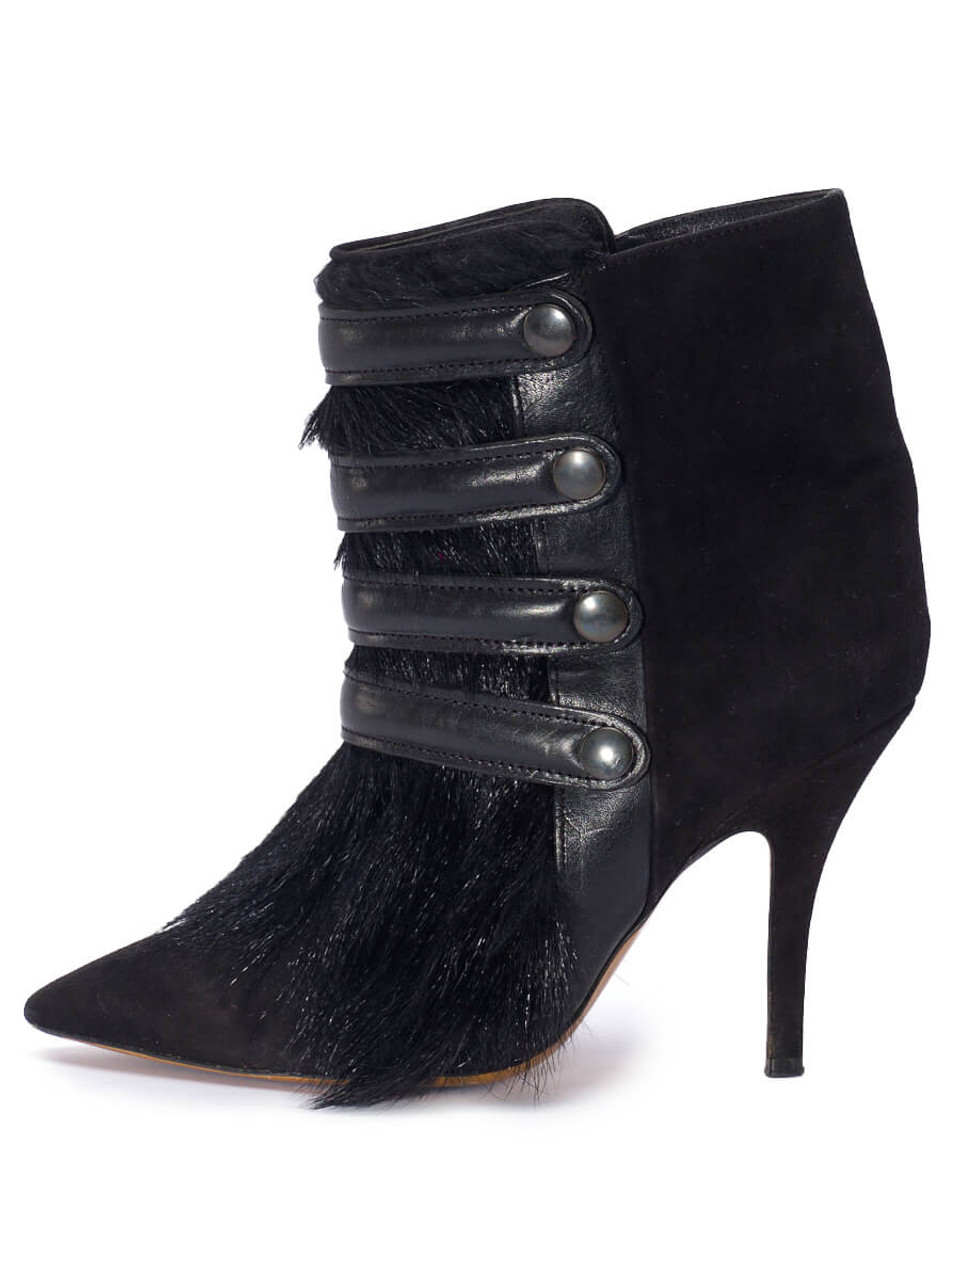 Isabel Marant Black Suede Tacy Ankle Boots